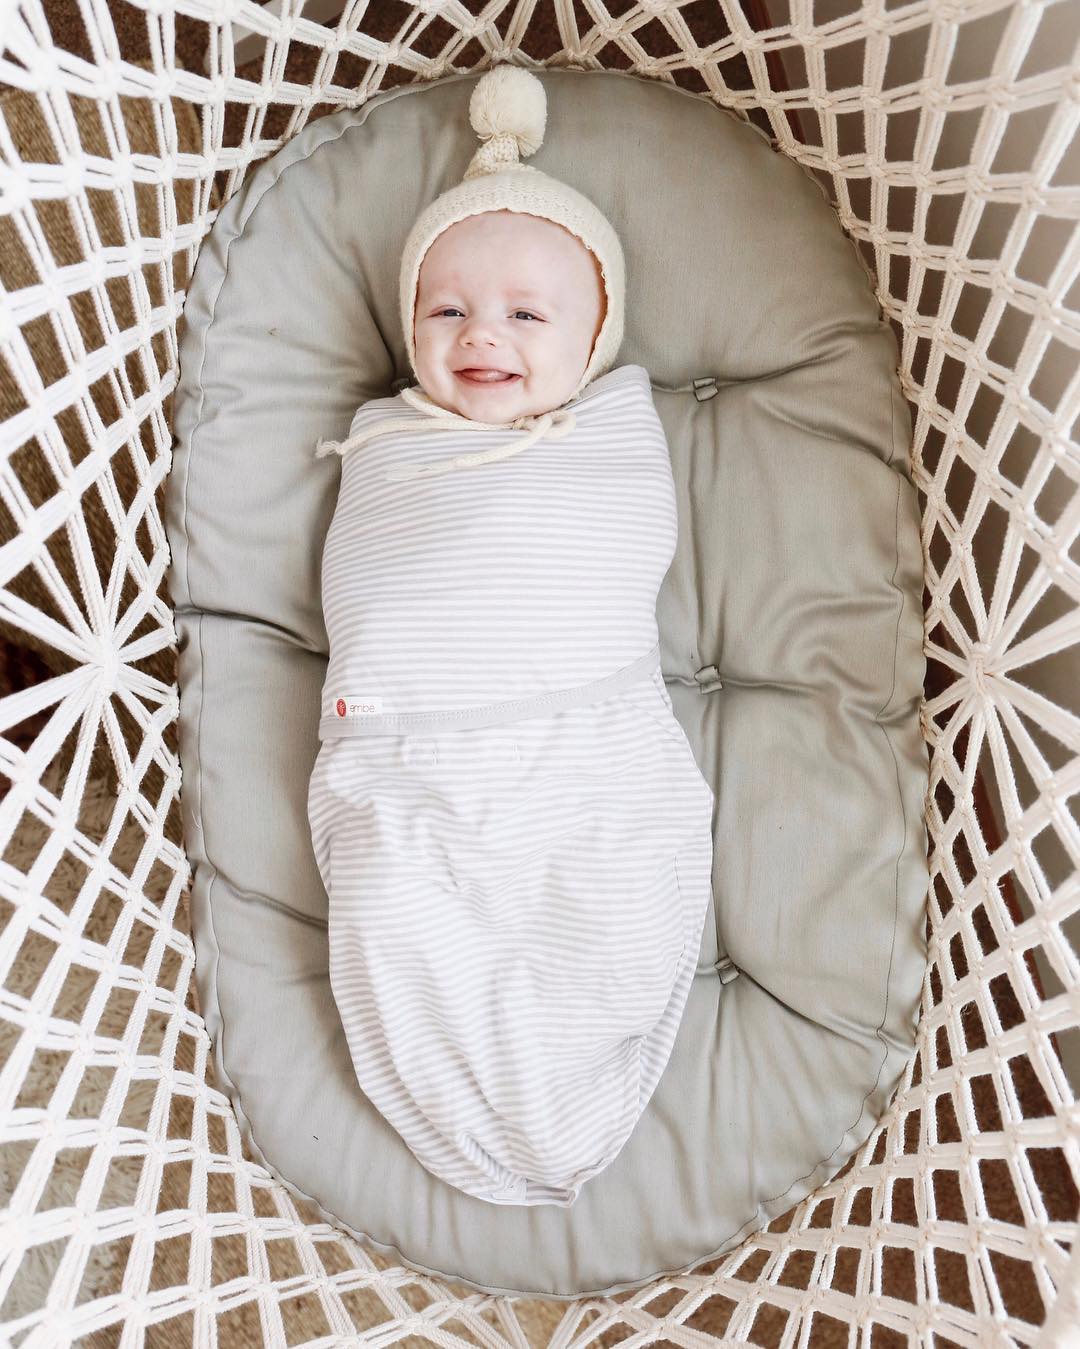 baby smiling in a hanging bassinet